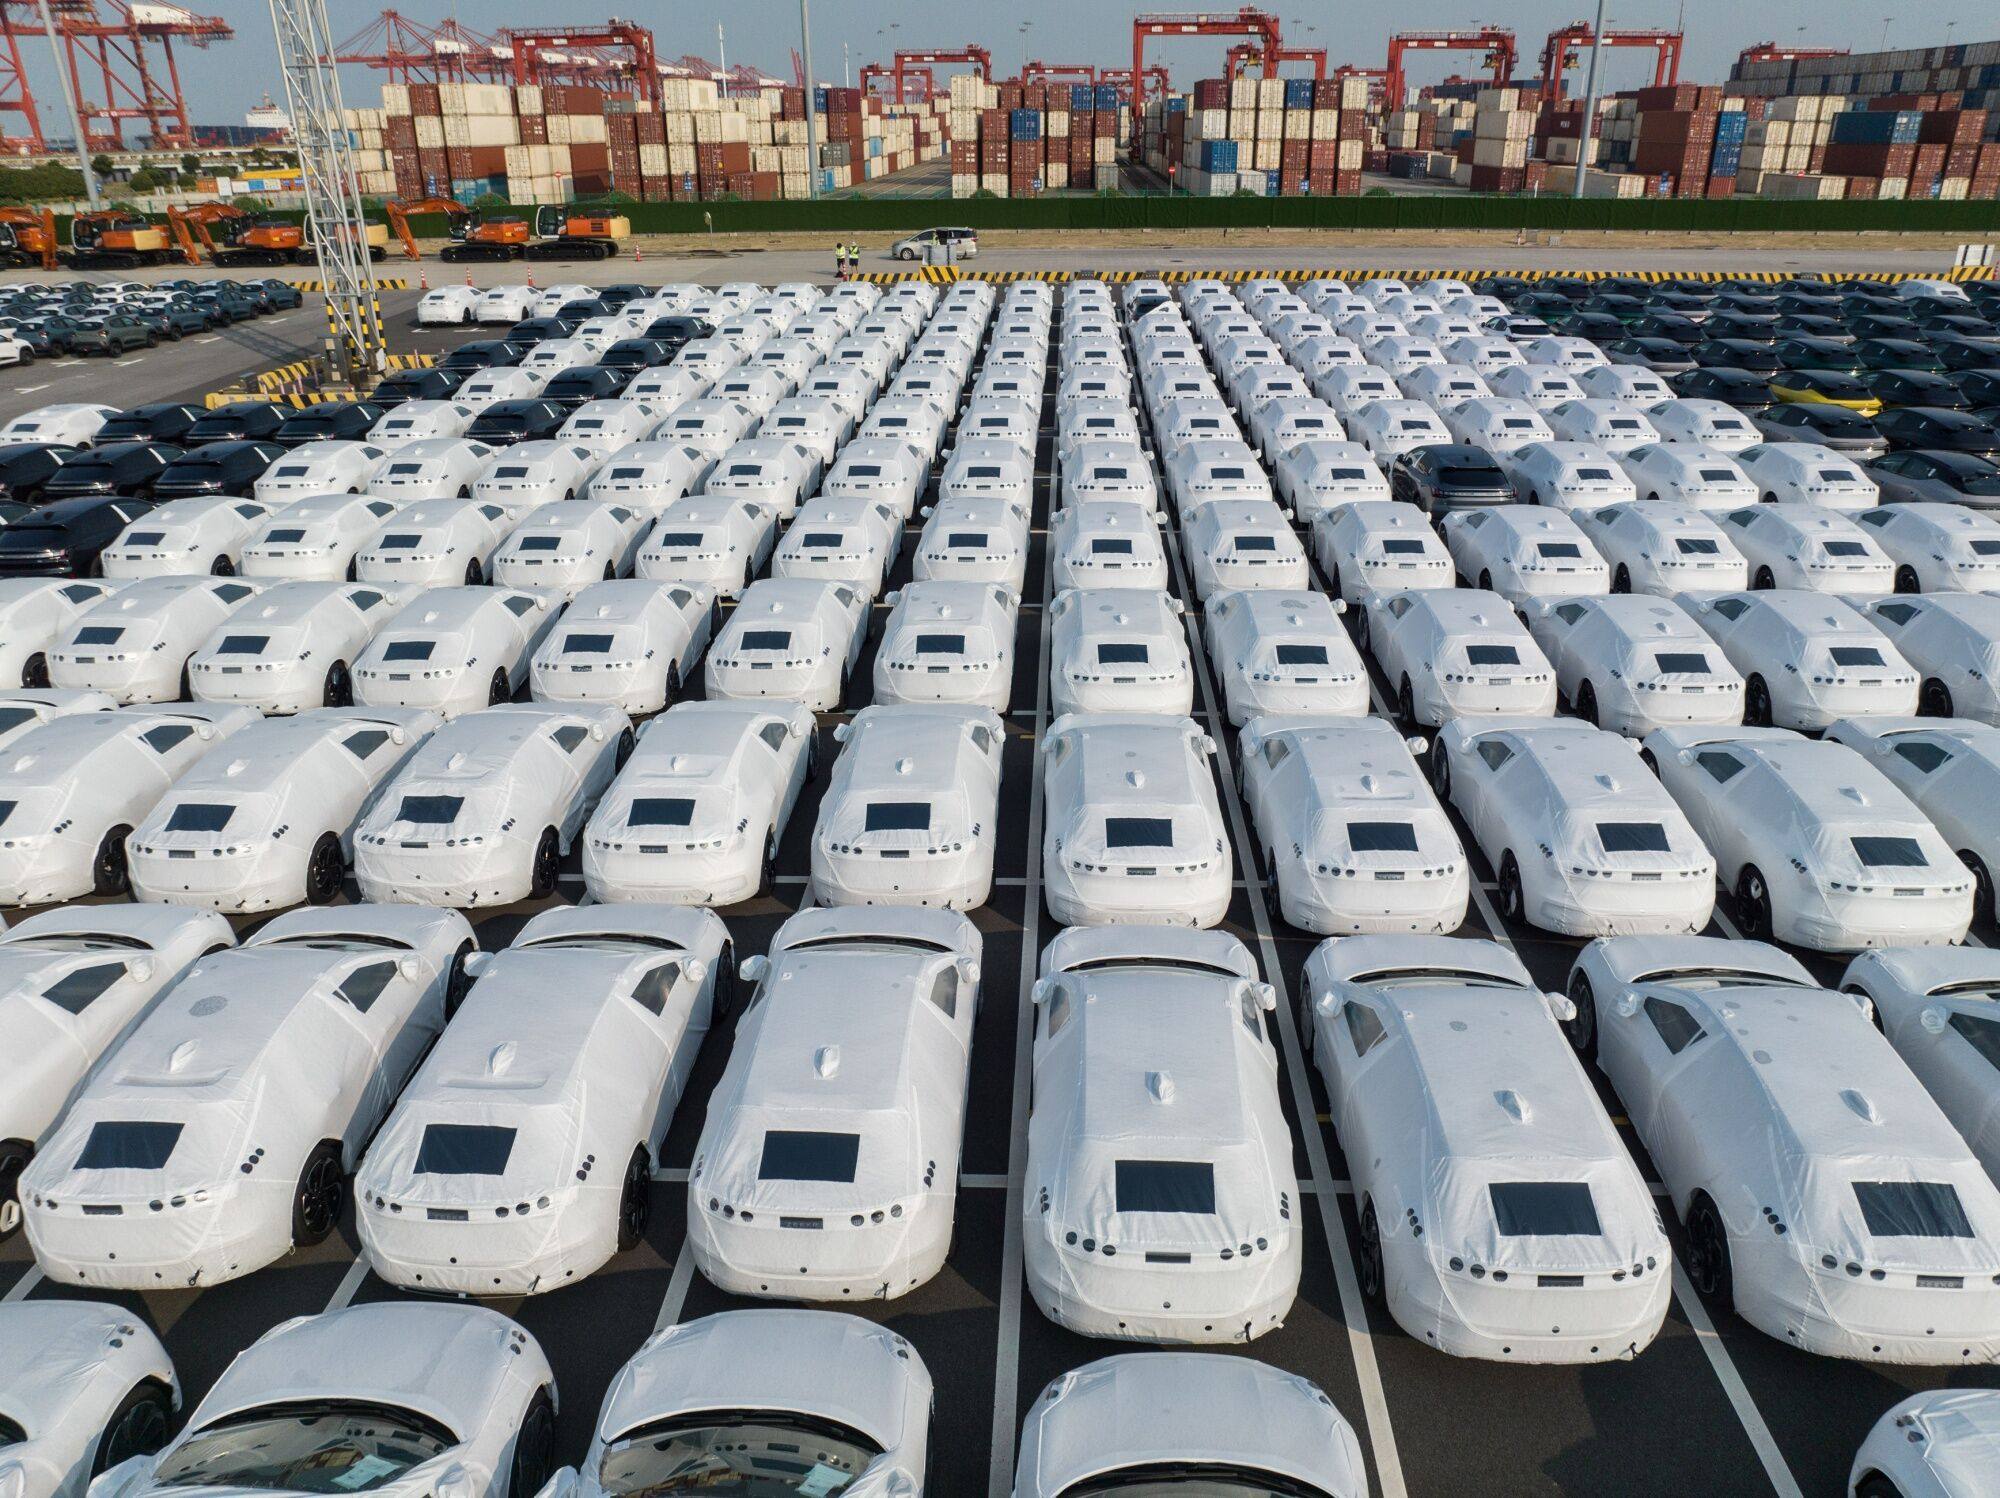 China-made electric cars await export to Europe in Jiangsu province. Photo: Bloomberg